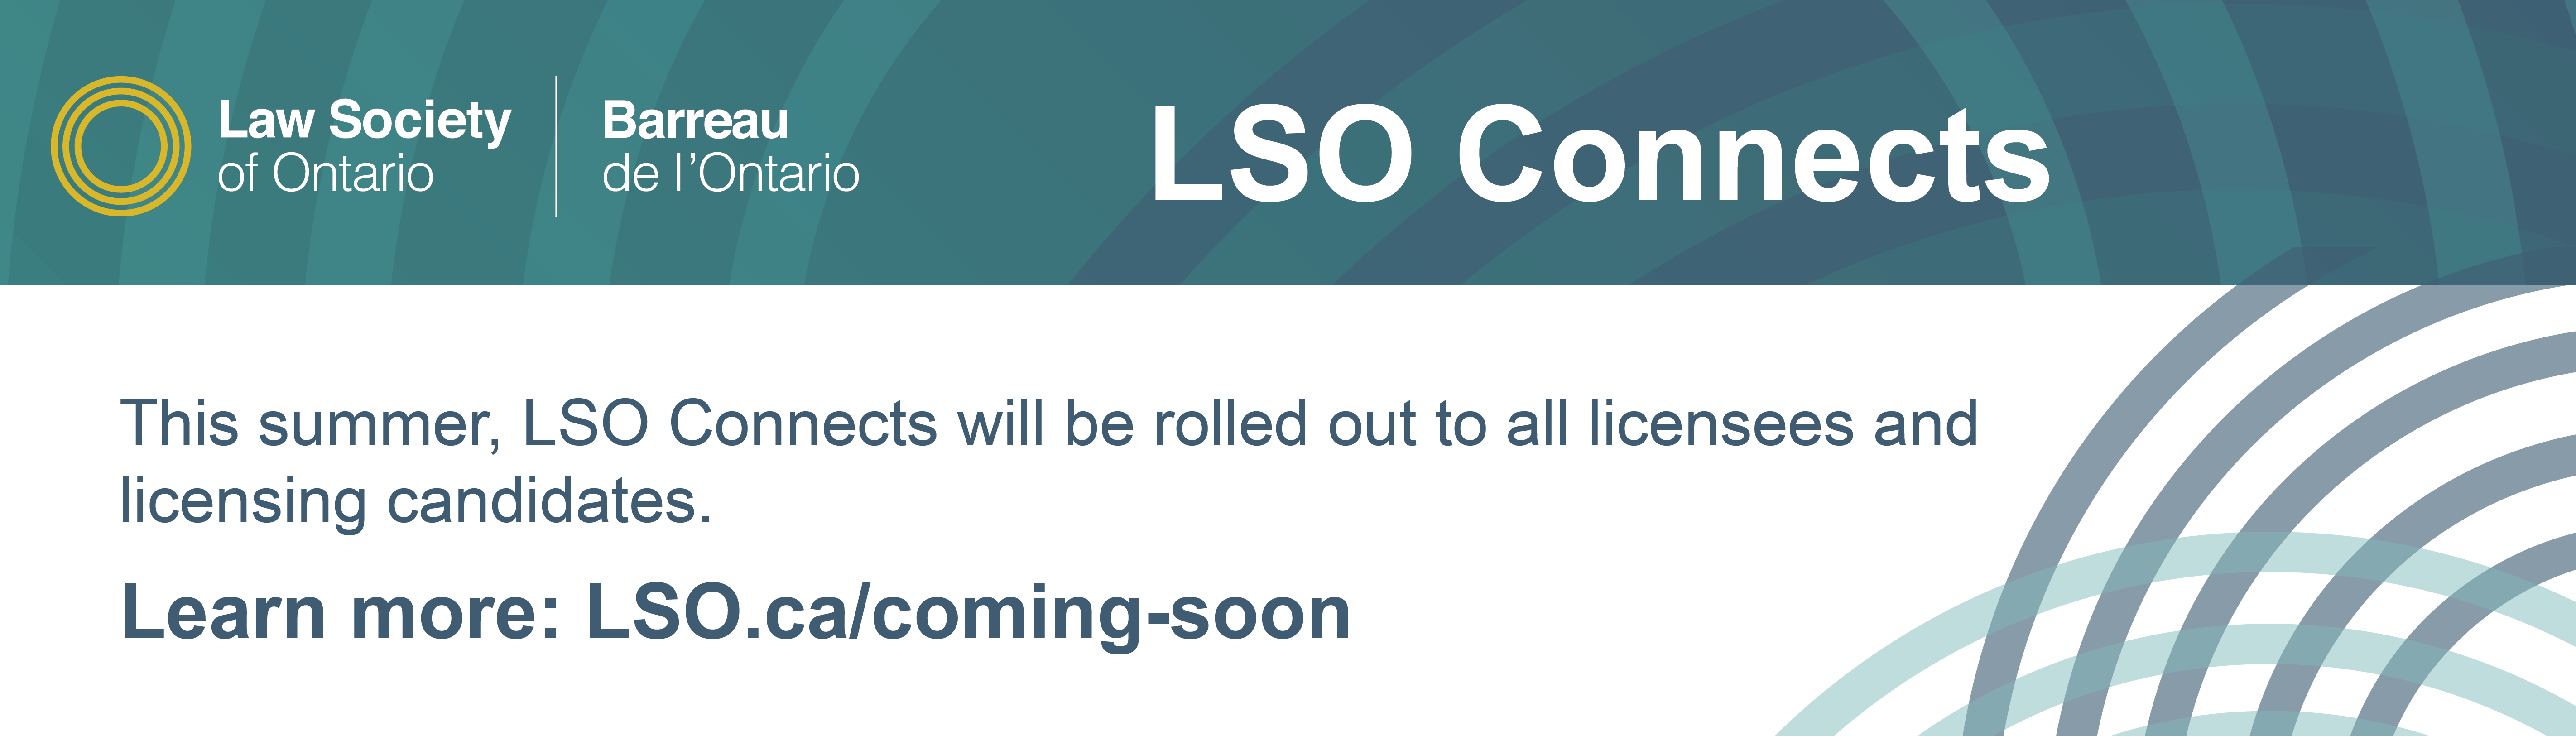 LSO Connects is coming soon